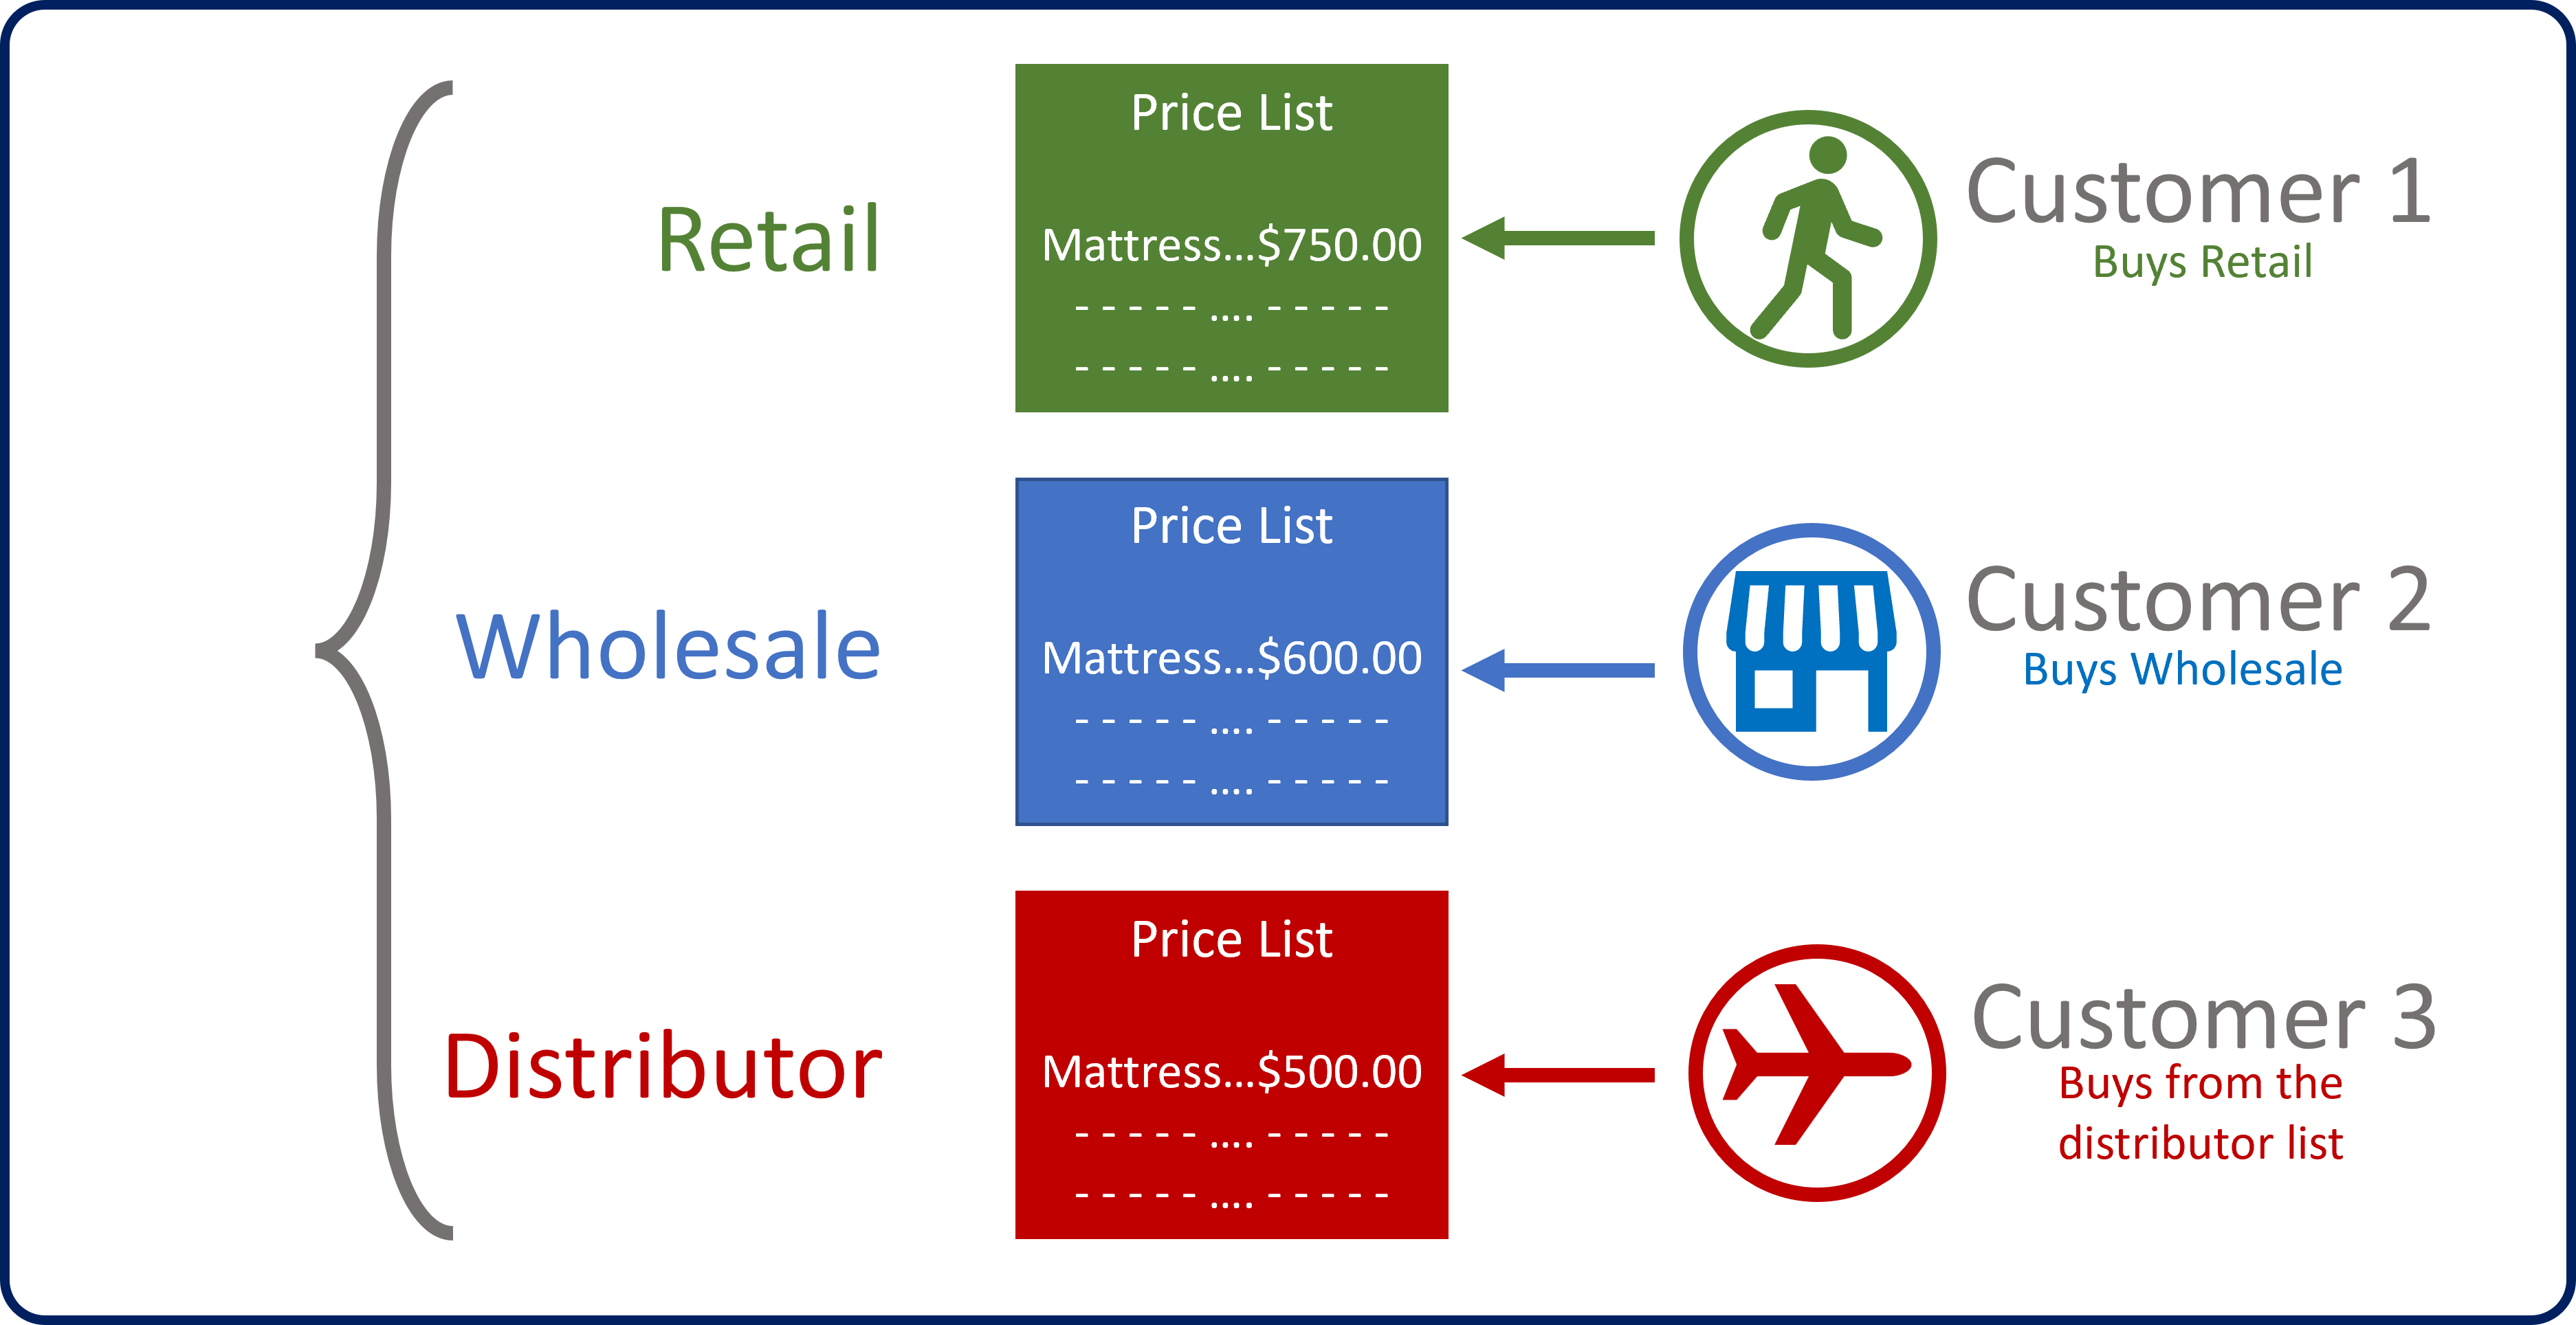 Customized pricing tiers: Retail, Wholesale, and Distributor.